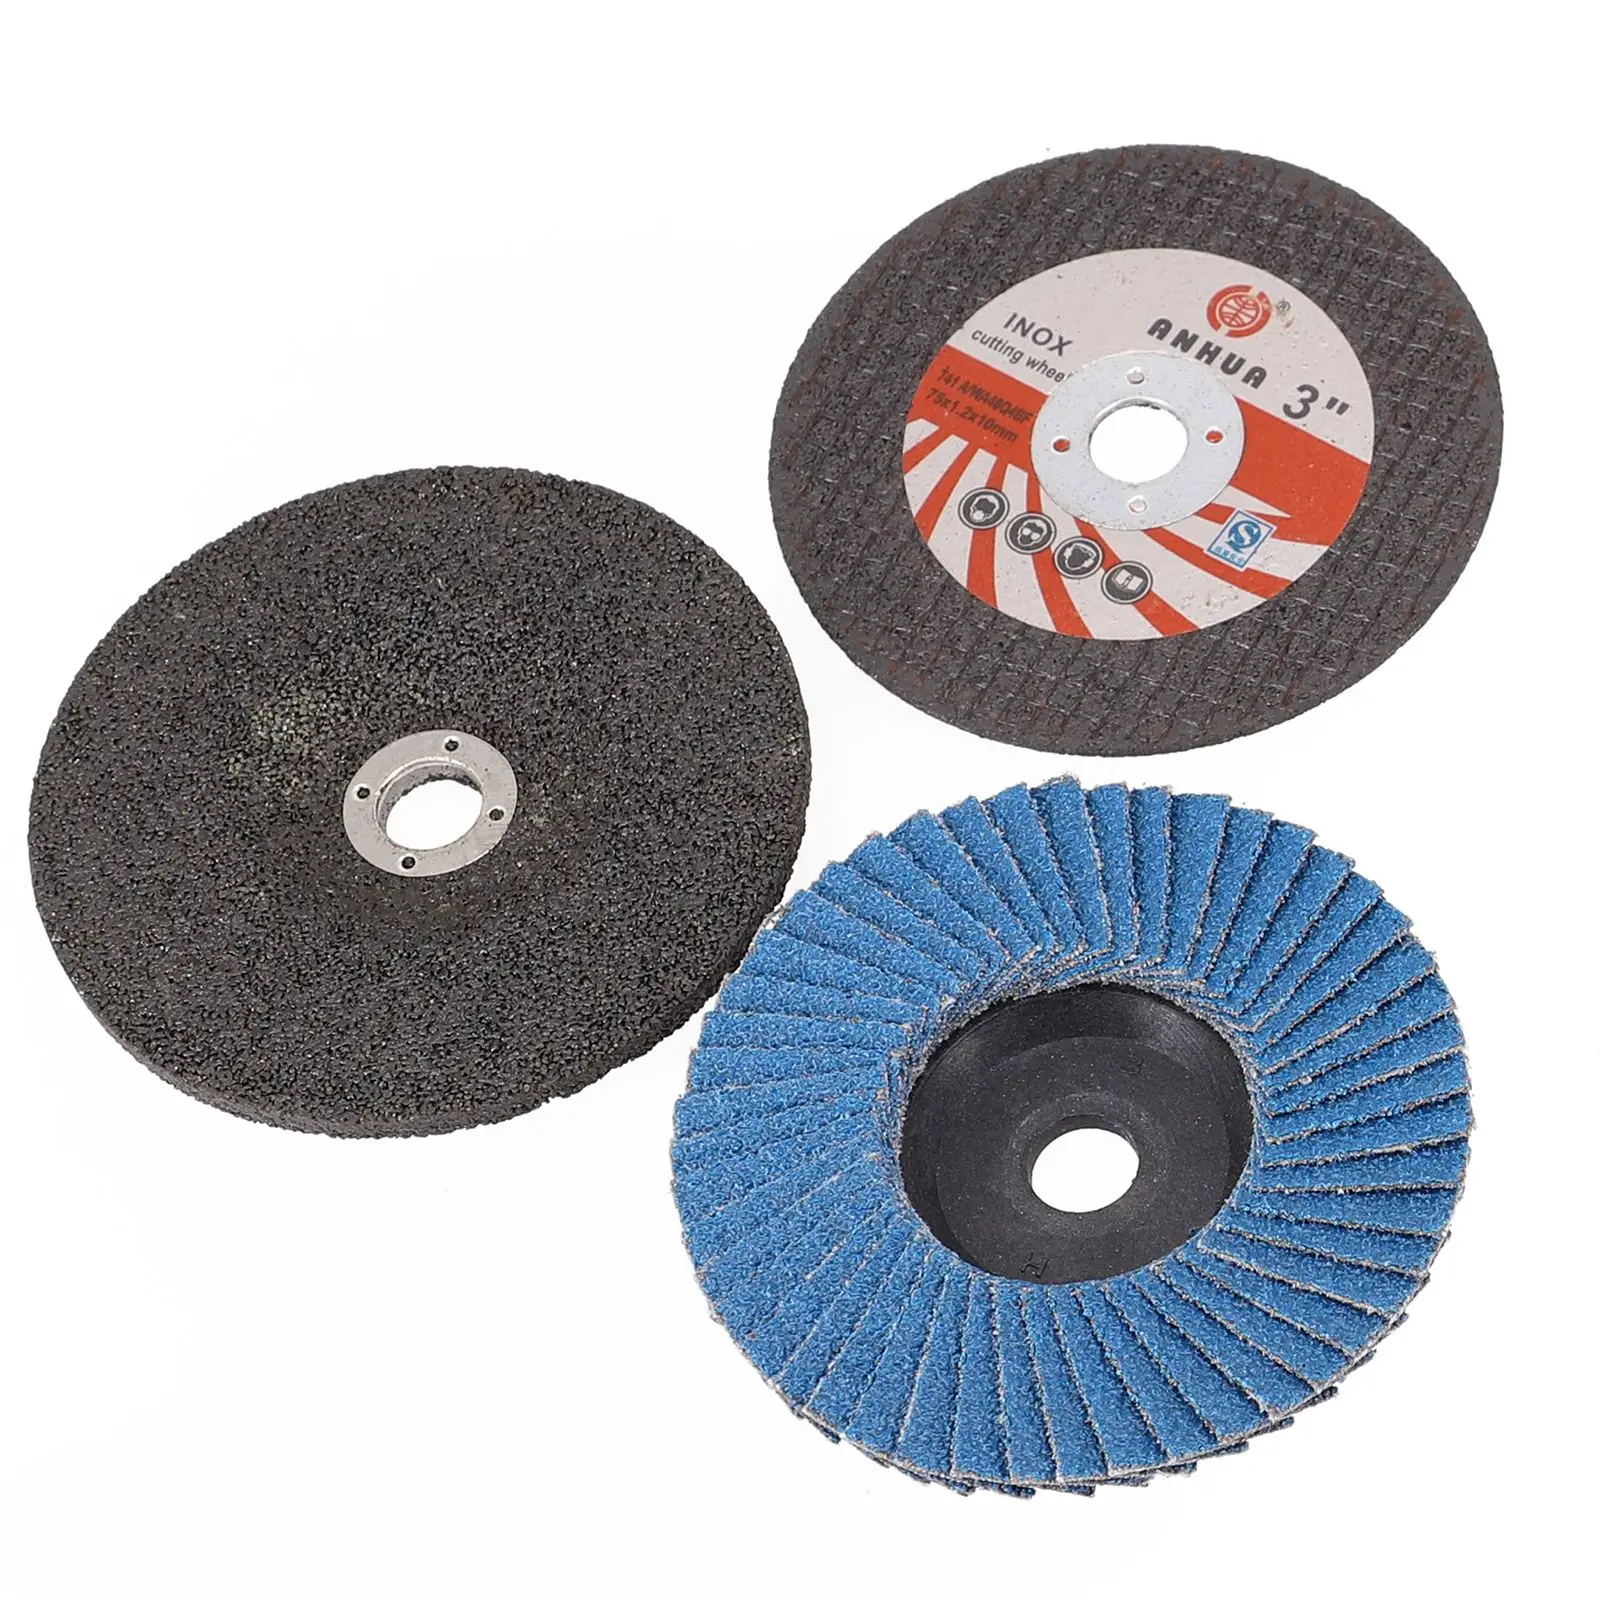 Brand New Cutting Disc Grinding Wheel Circular Saw Blade For Angle Grinder For Ceramic Tile Wood Polishing Disc chainsaw grinding disc 108x3 2x22mm for chainsaw sharpener for cutting for polishing 3 8 404 chain brand new